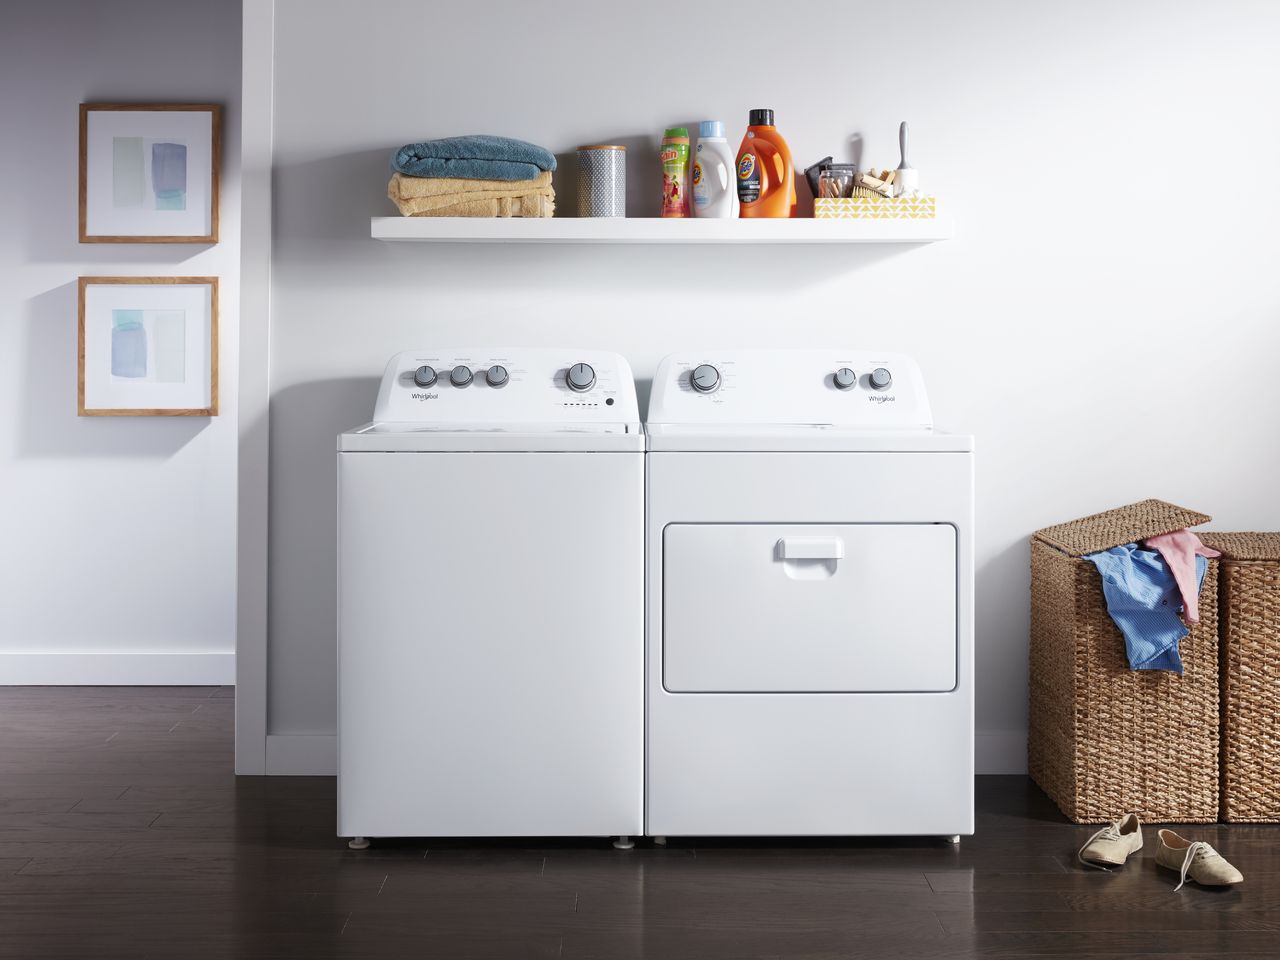 How To Fix A Whirlpool Dryer That Won T Heat Up Flamingo Appliance Service